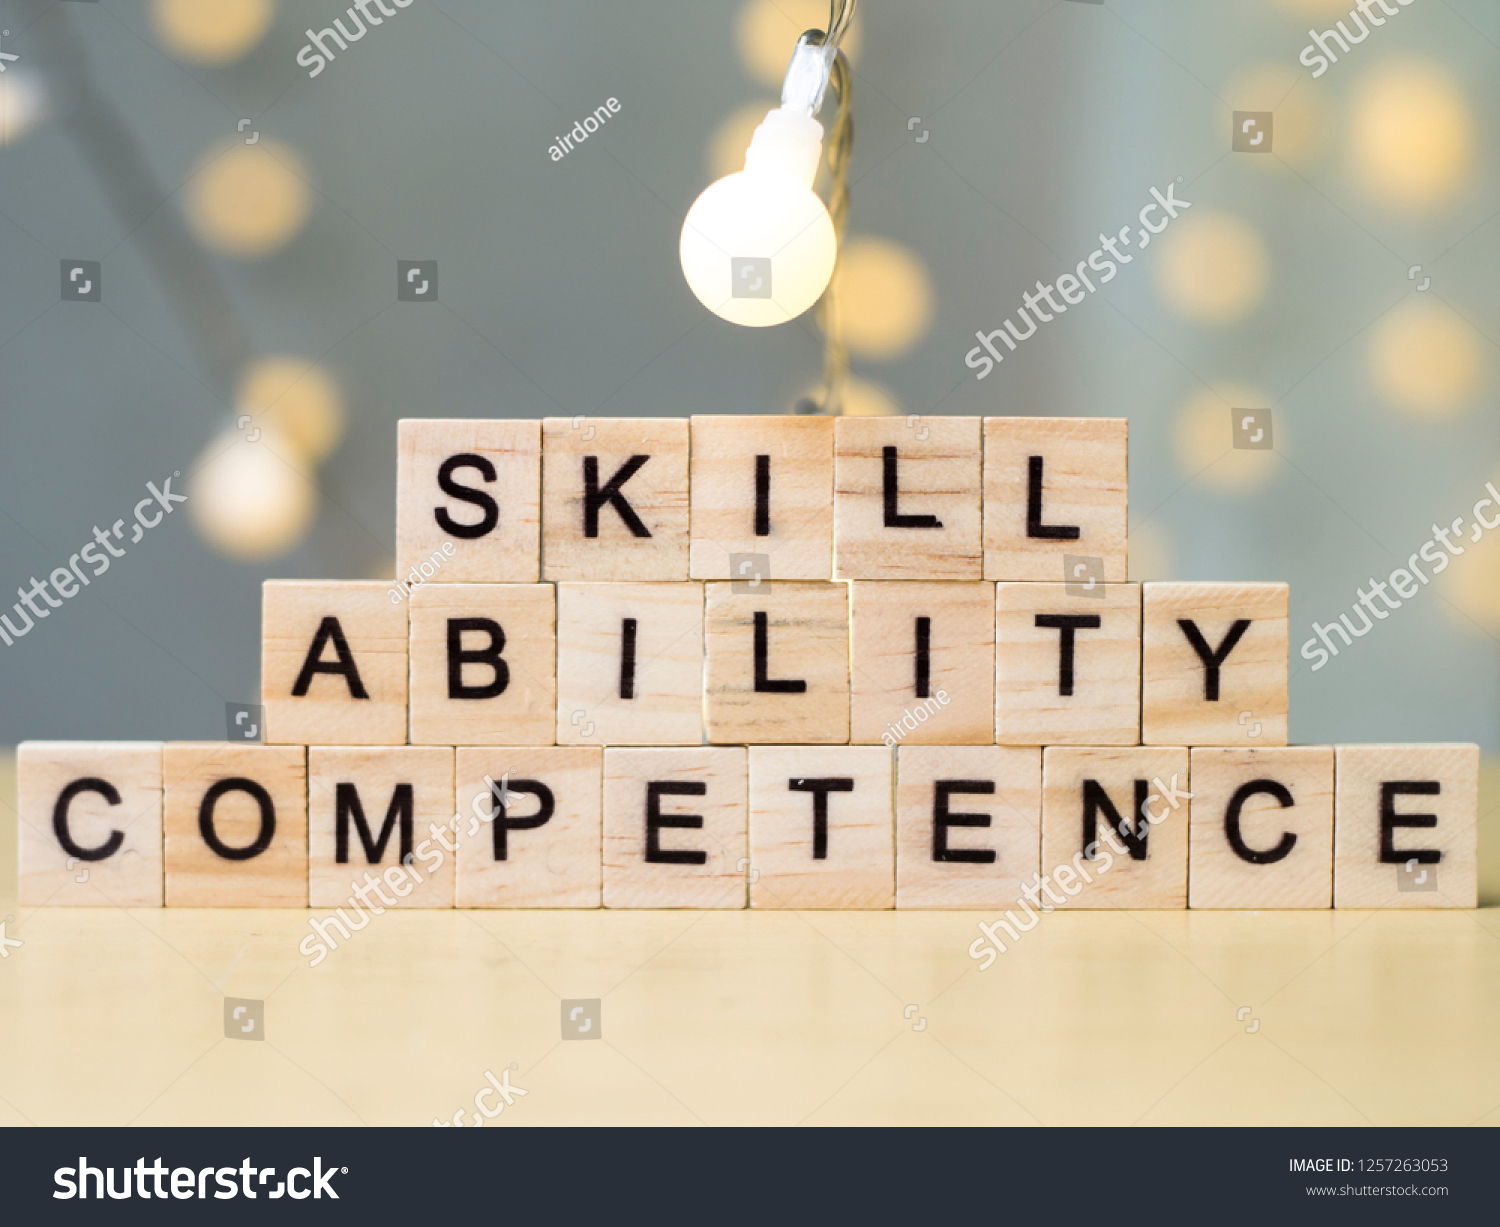 Skill Ability Competence. Motivational business words quotes, wooden lettering typography concept #1257263053